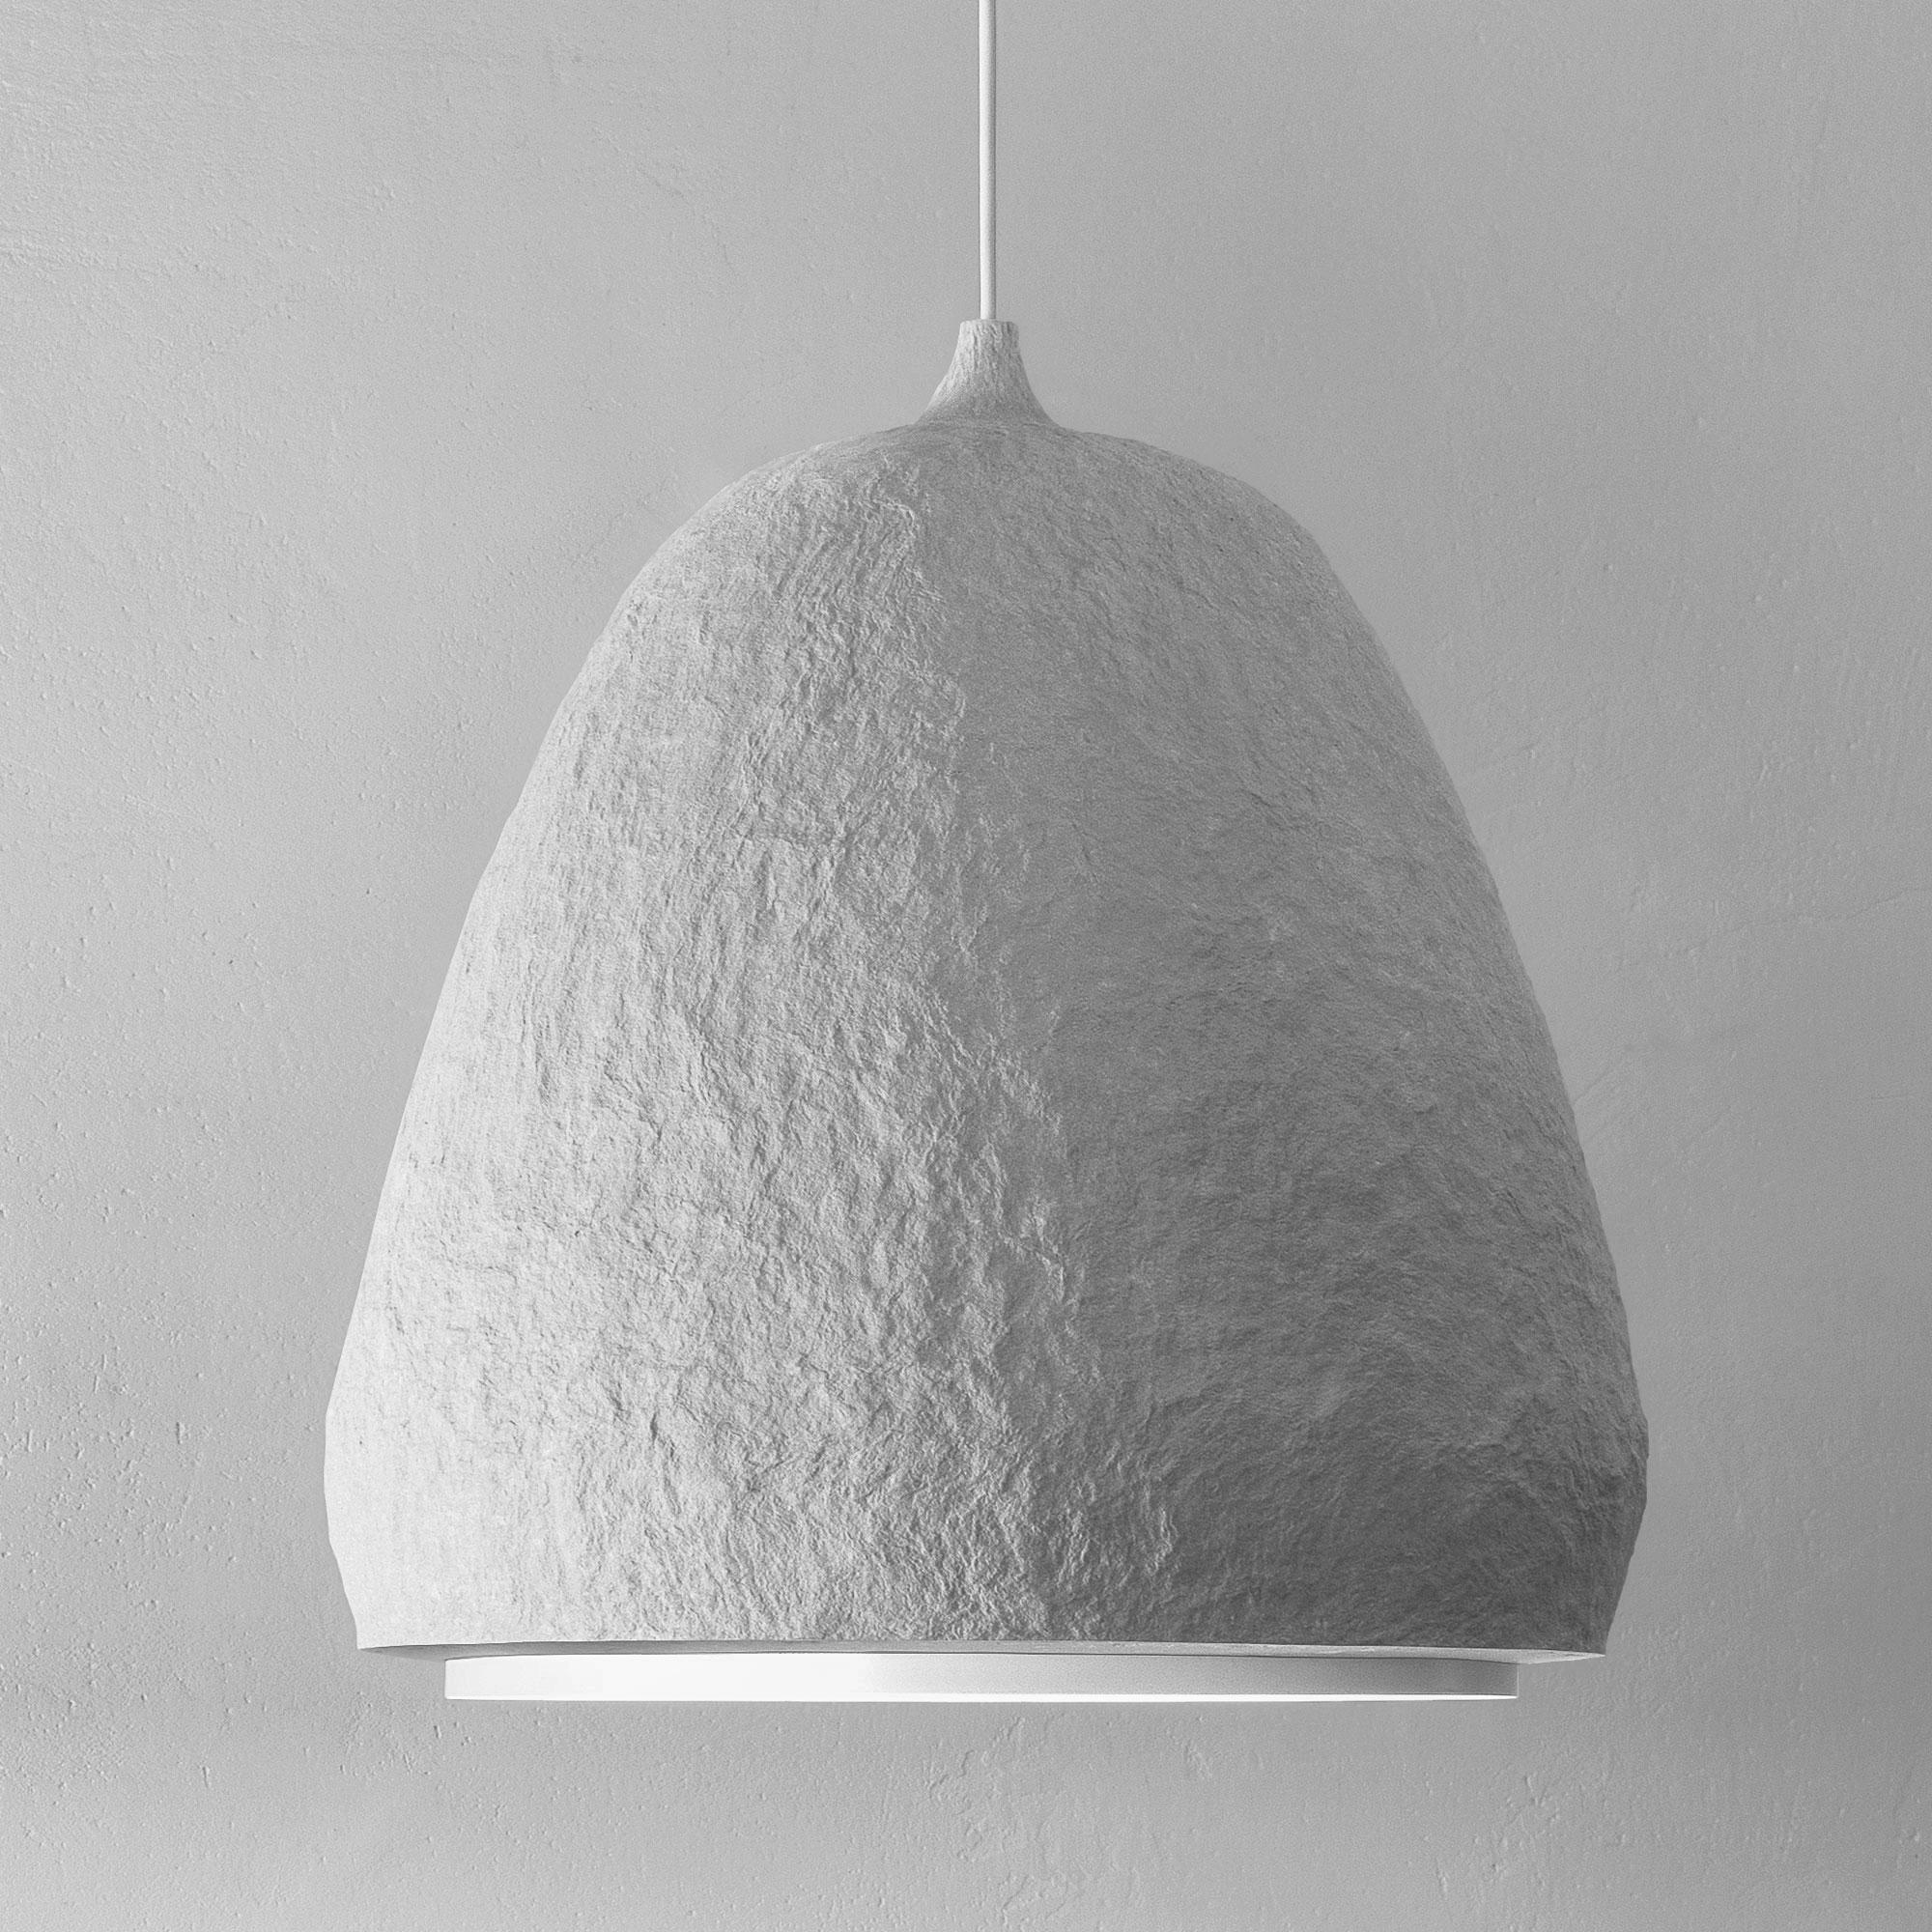 Pendant light “BALANCE”, gray, tall.

A combination of natural stone-like rigidity and lightness of a cloud. These handmade ceiling lights have a unique character and bring a sense of harmony. The ceiling lights are a versatile fit for spaces of